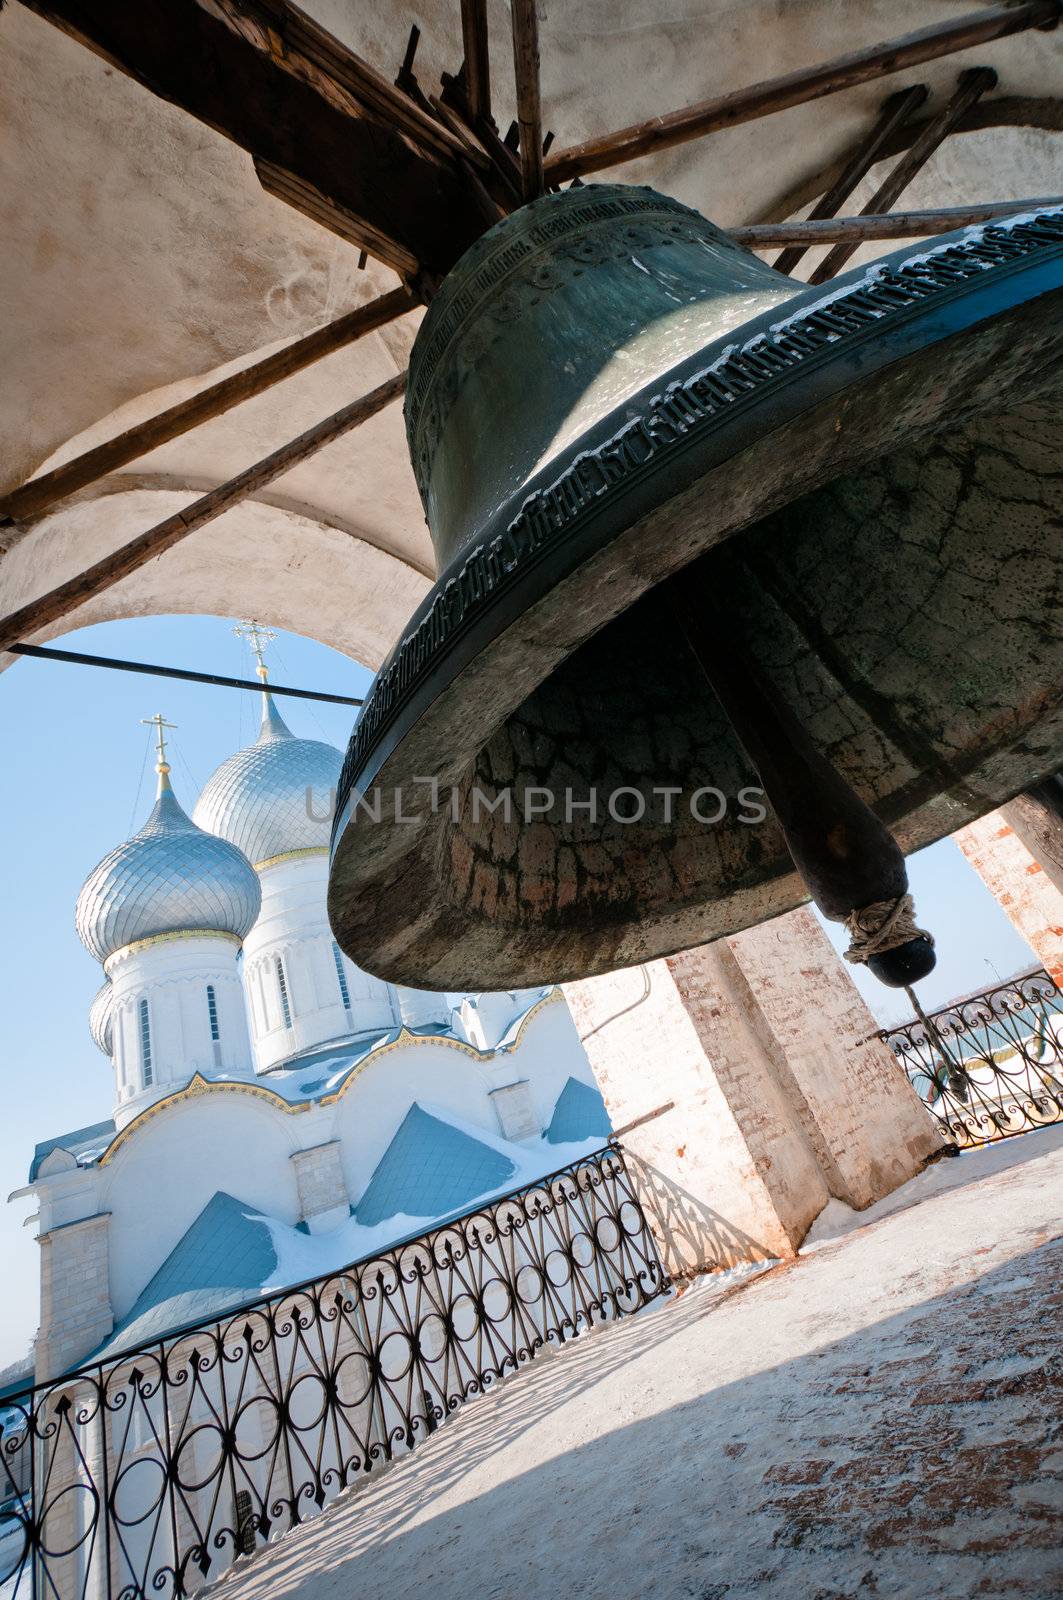 Giant bell with church on background, sky is clear